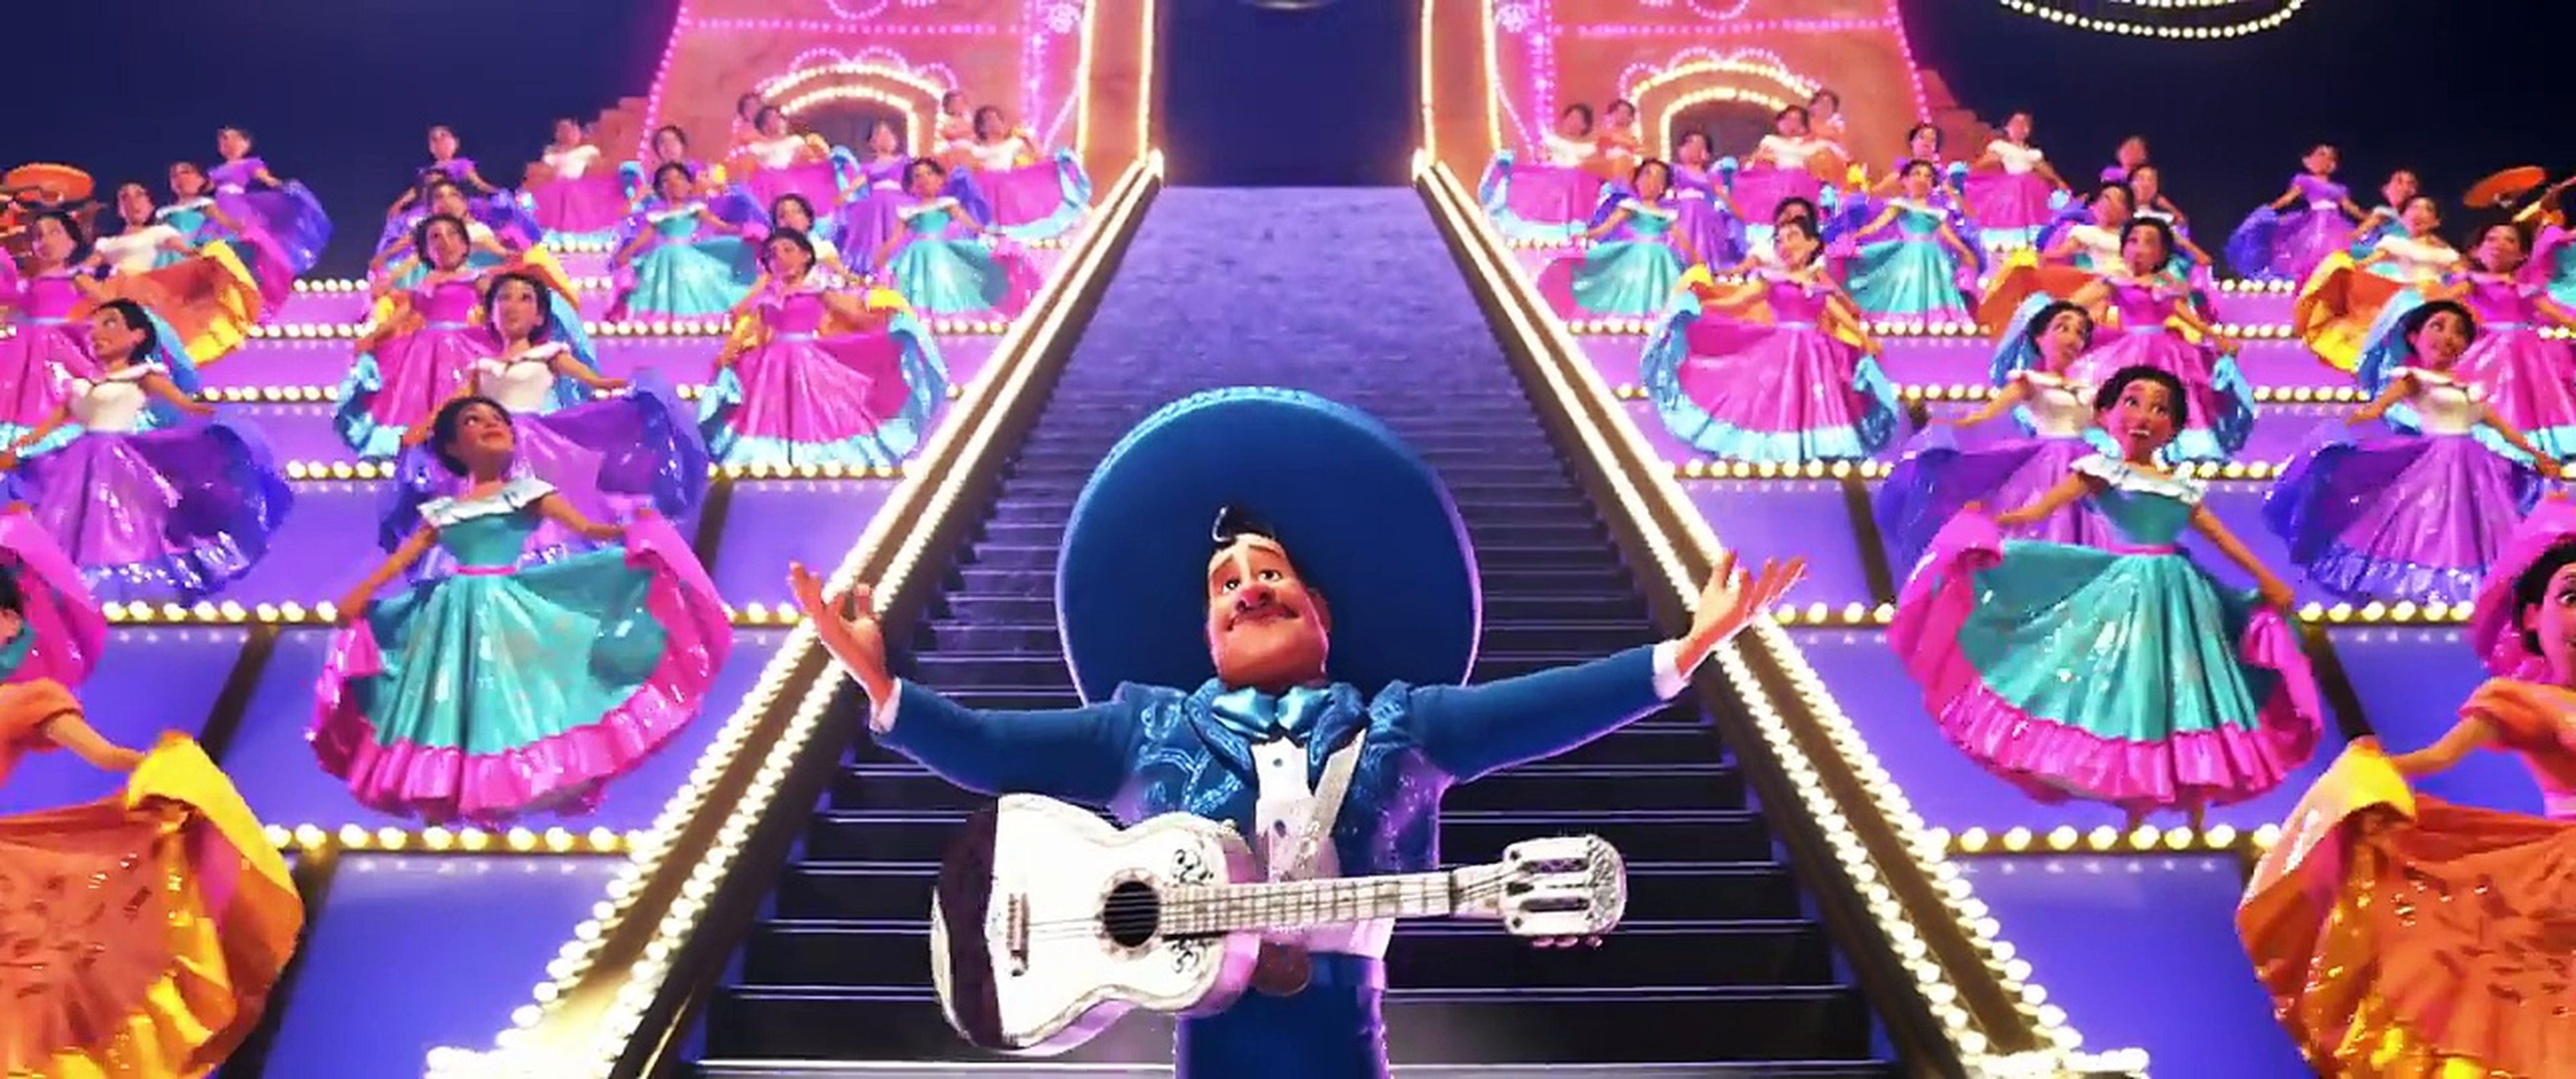 Coco - Tercer tráiler: Find your voice